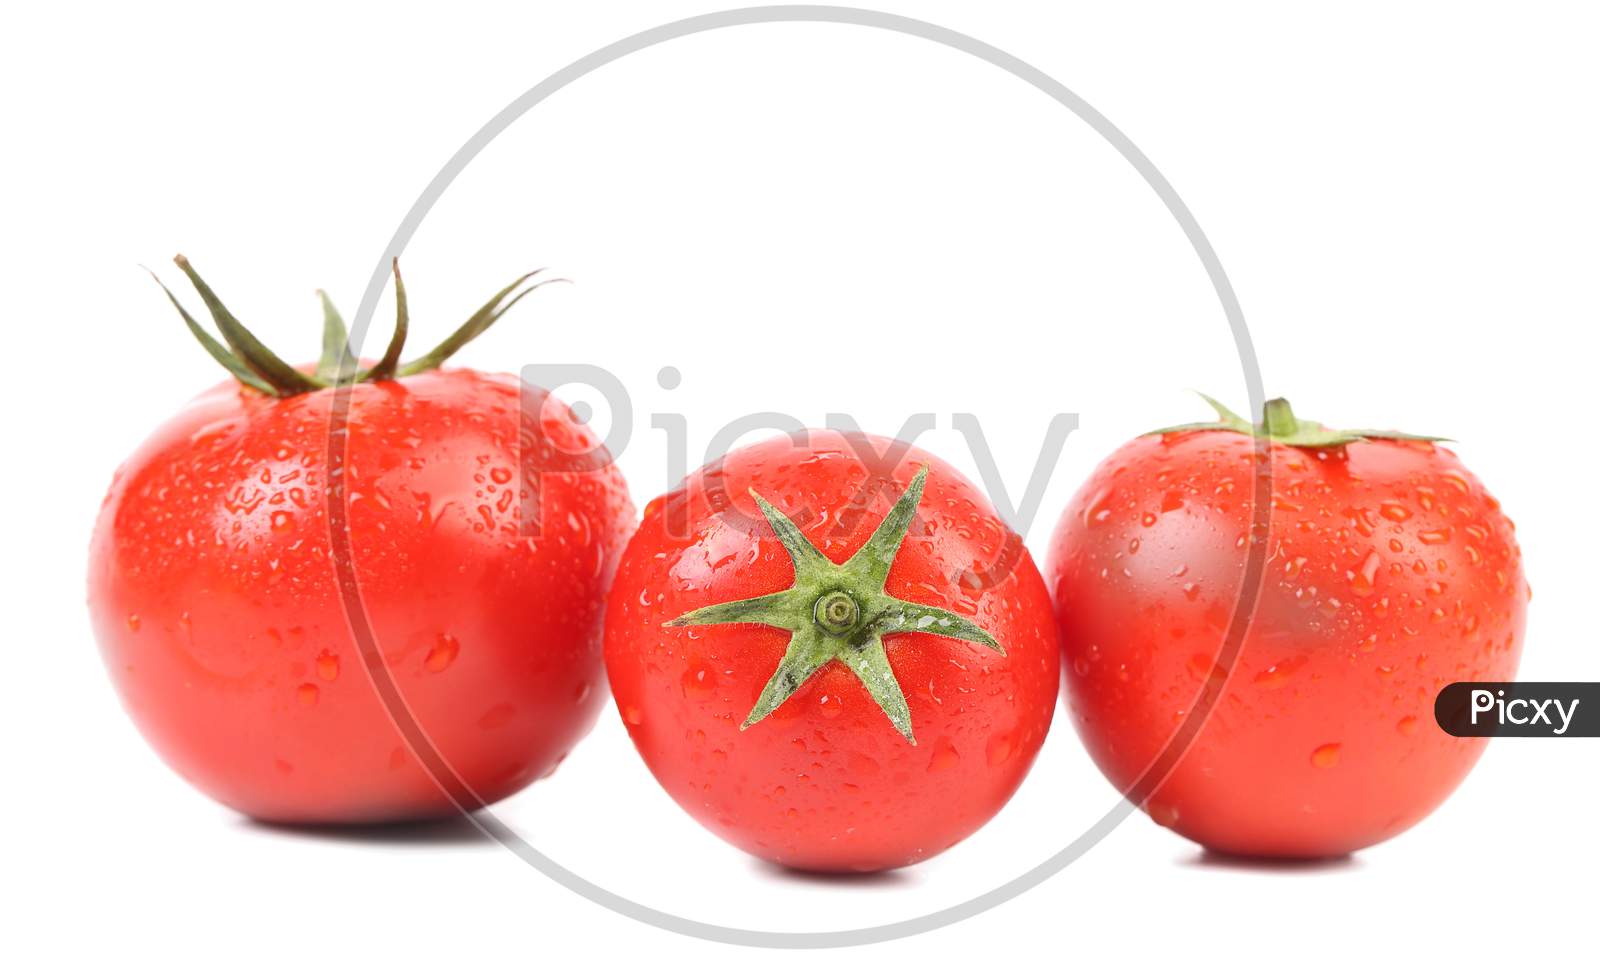 Three Red Ripe Tomatoe. Isolated On A White Background.